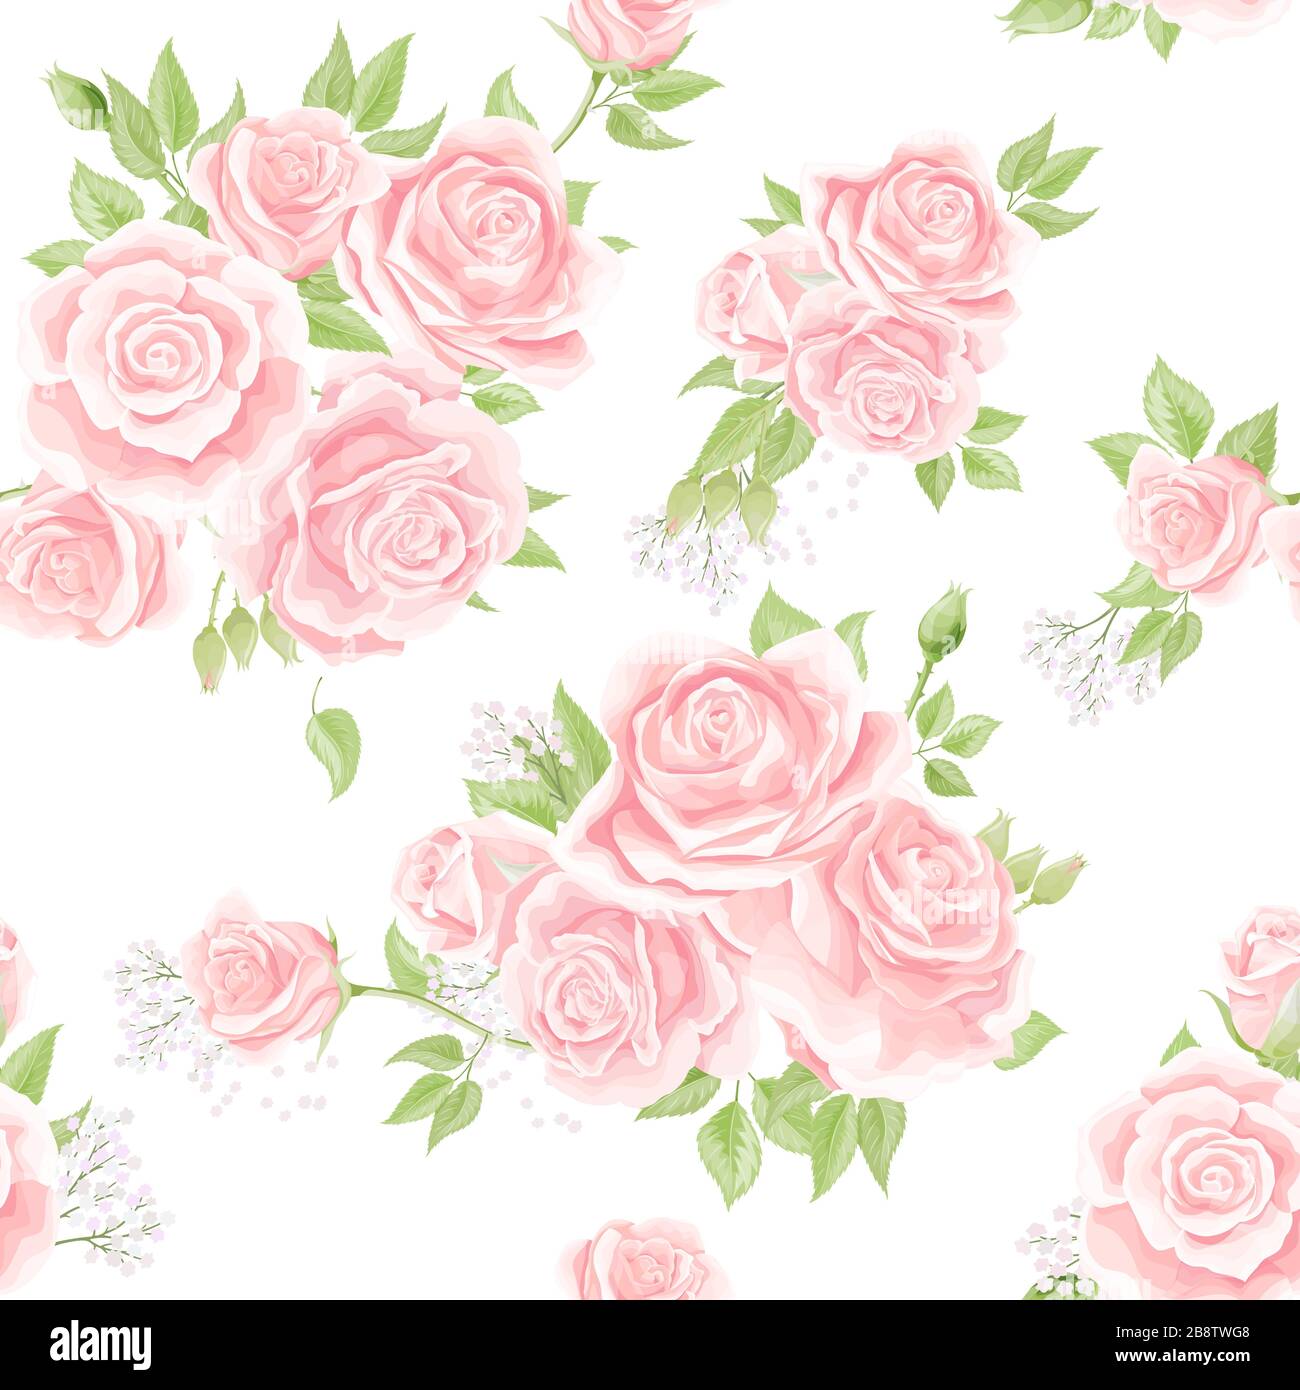 Seamless pattern with cream pink roses. Vintage floral background ...